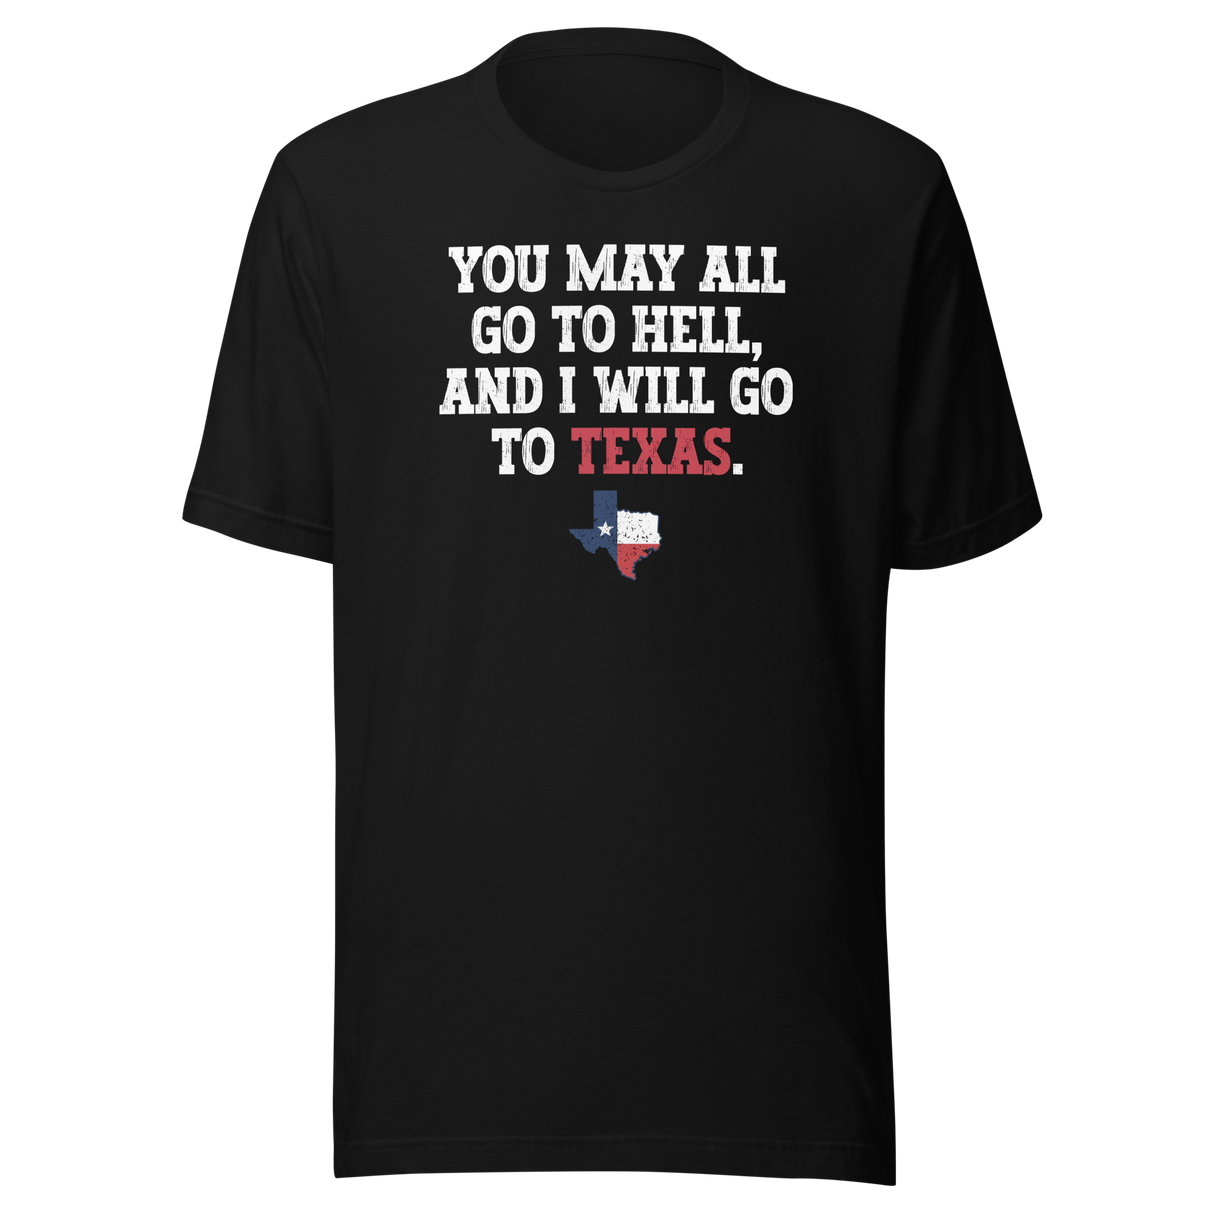 you-may-all-go-to-hell-and-i-will-go-to-texas-life-tee-travel-t-shirt-life-tee-texas-t-shirt-bold-tee#color_black